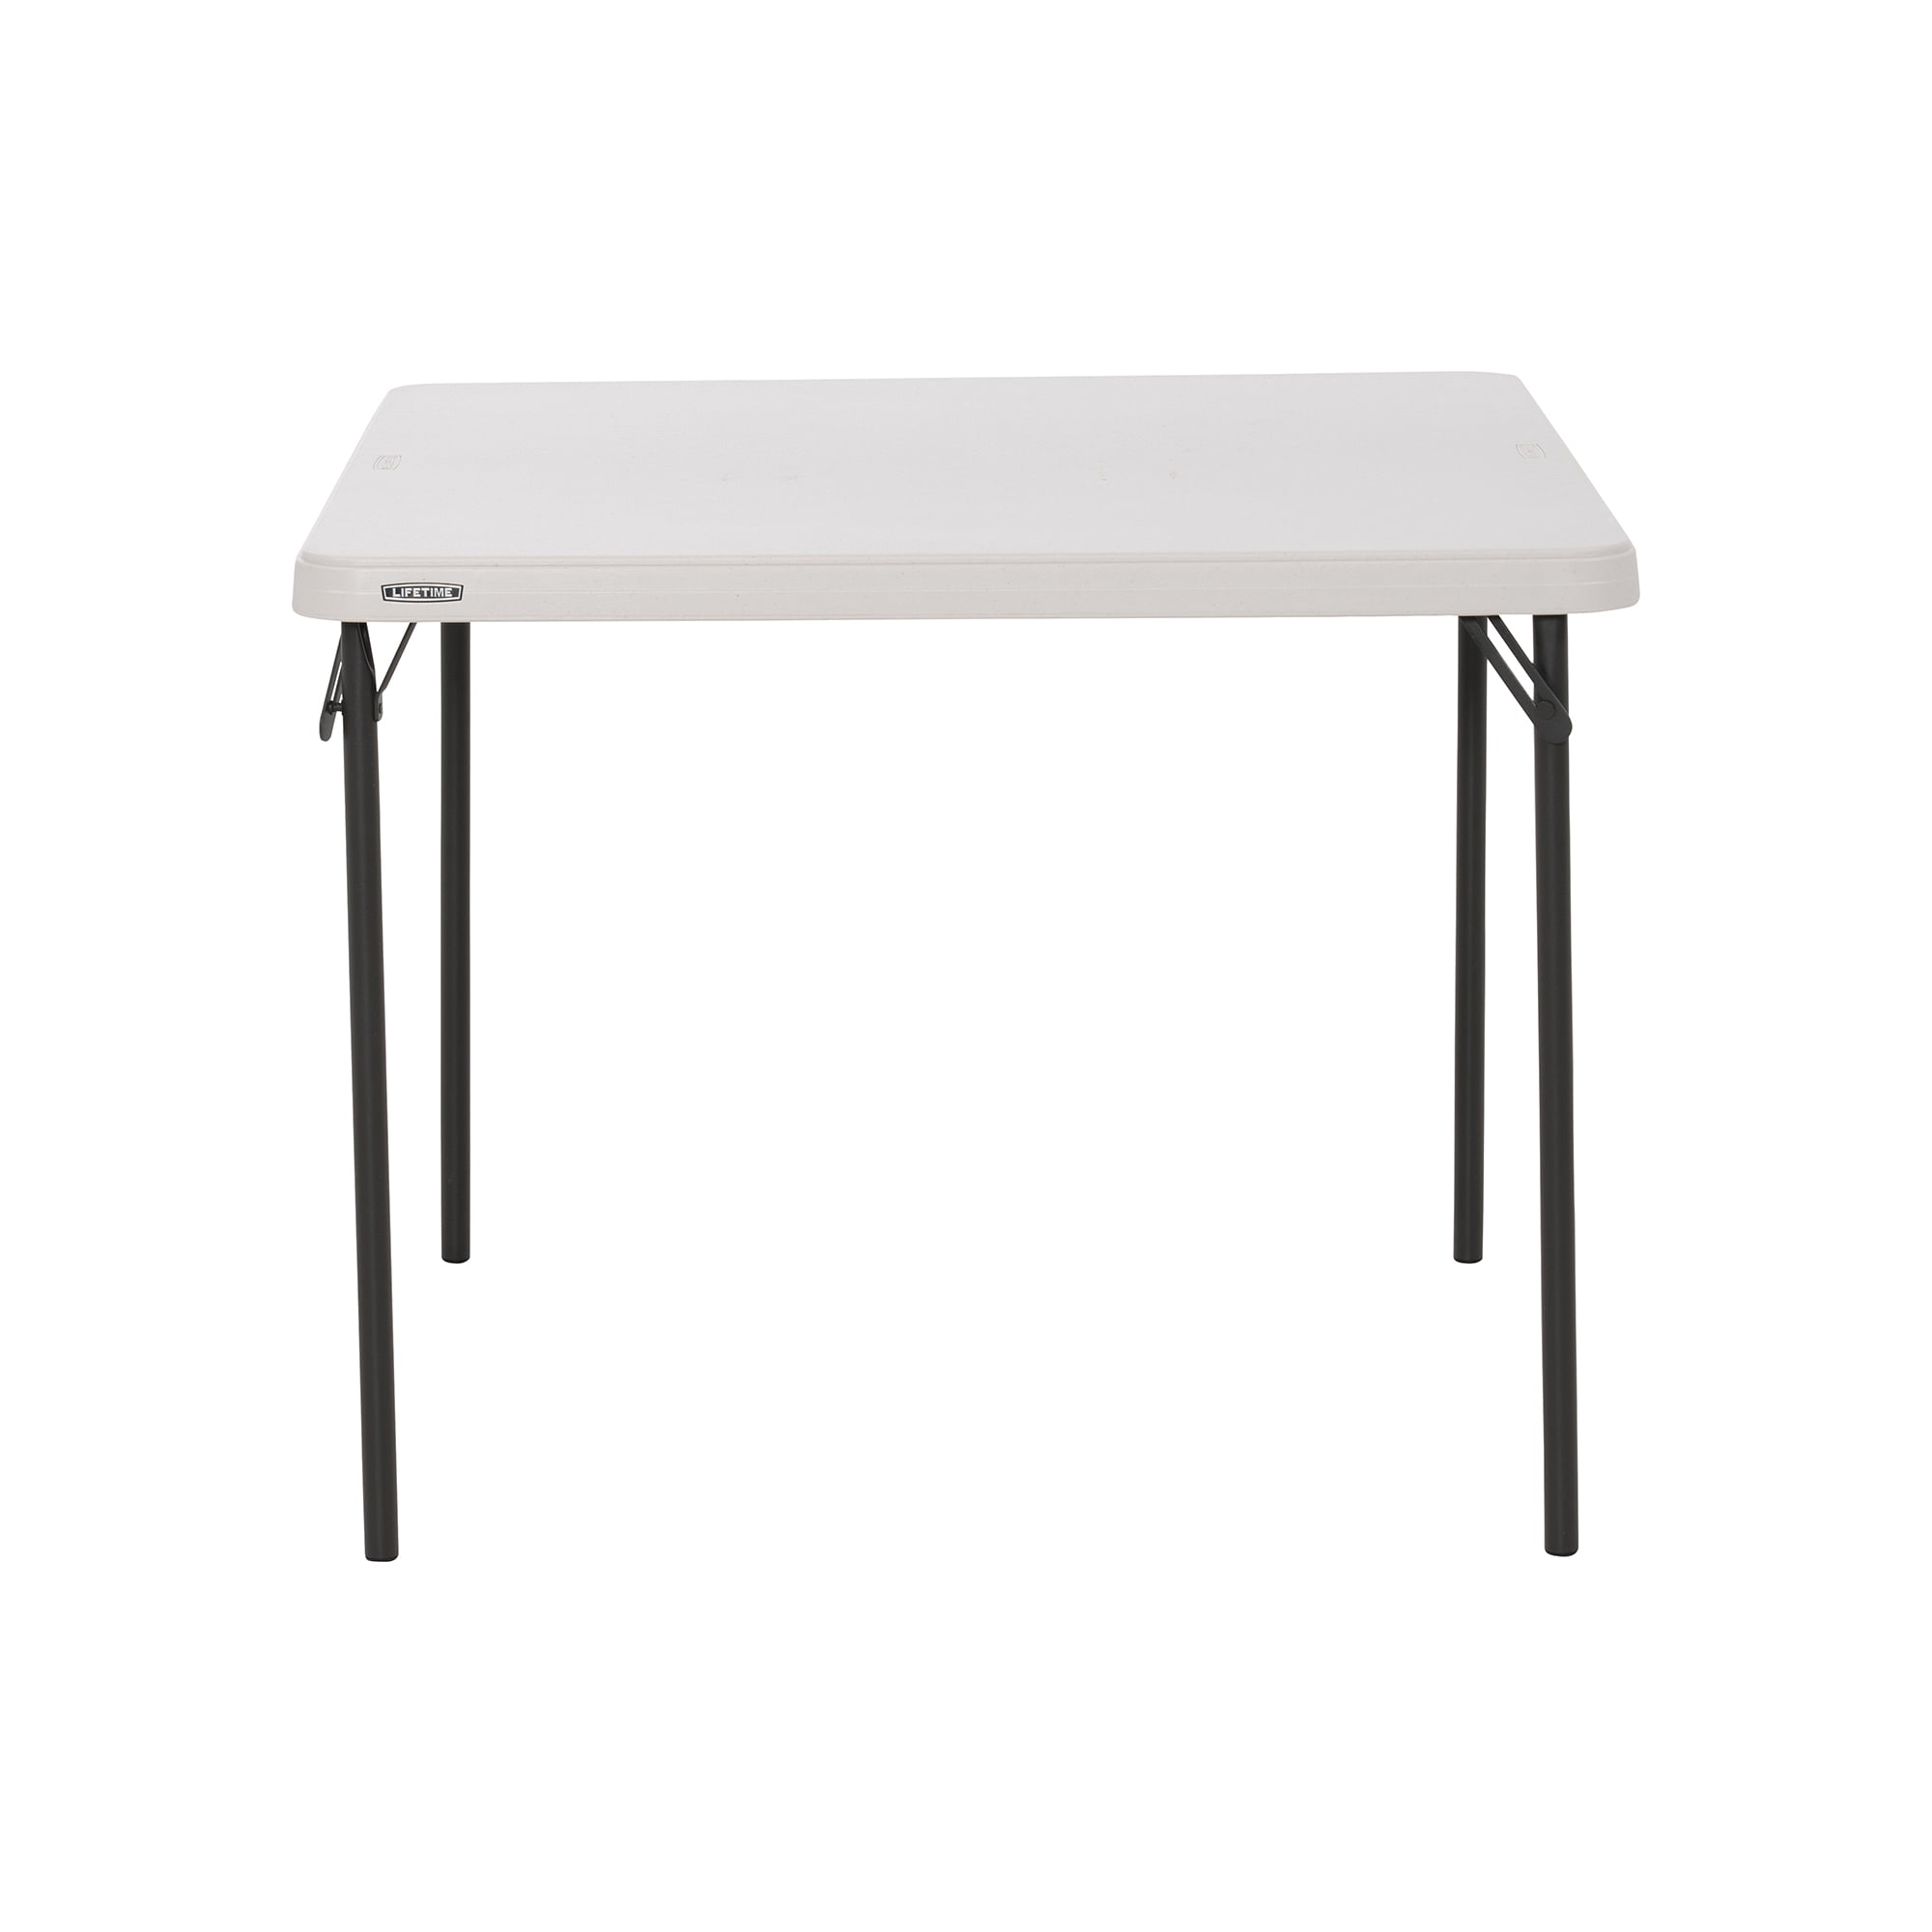 Lifetime 37 inch Square Folding Table, Indoor/Outdoor Commercial Grade,  White Granite (80783)